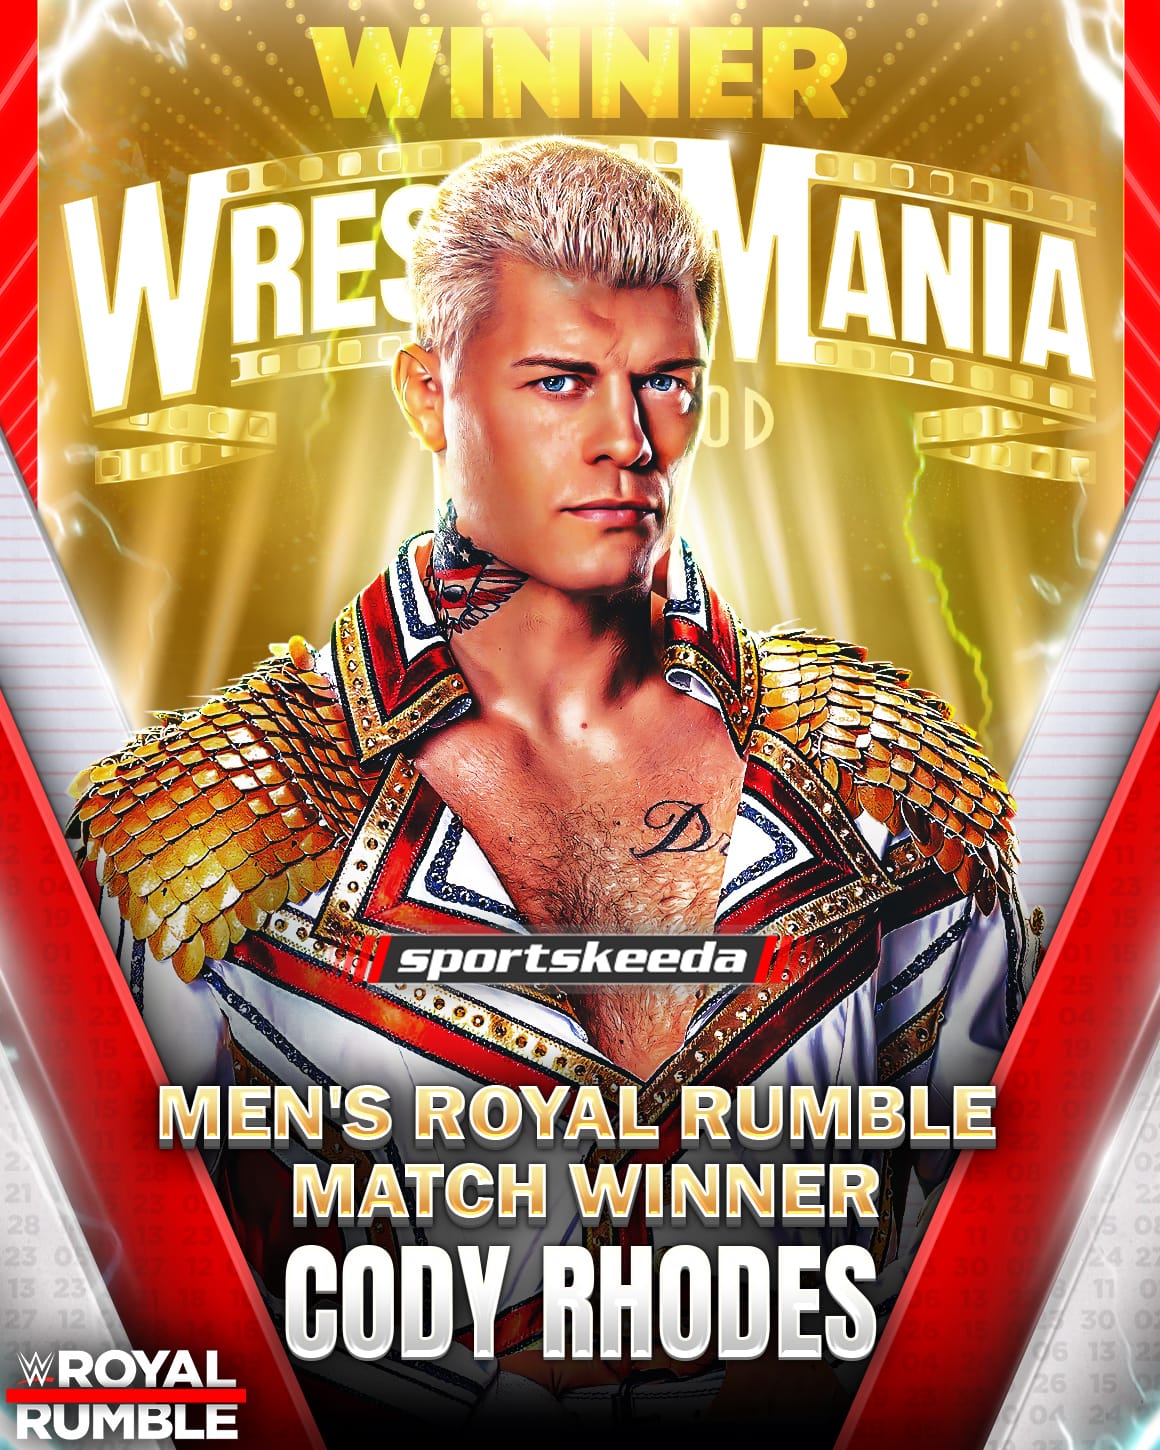 Sportskeeda Wrestling on X: "HE HAS DONE IT! CODY RHODES HAS DONE IT!! Call it The American Nightmare's much-awaited dream as Cody Rhodes has outlasted 29 other men to win the Men's